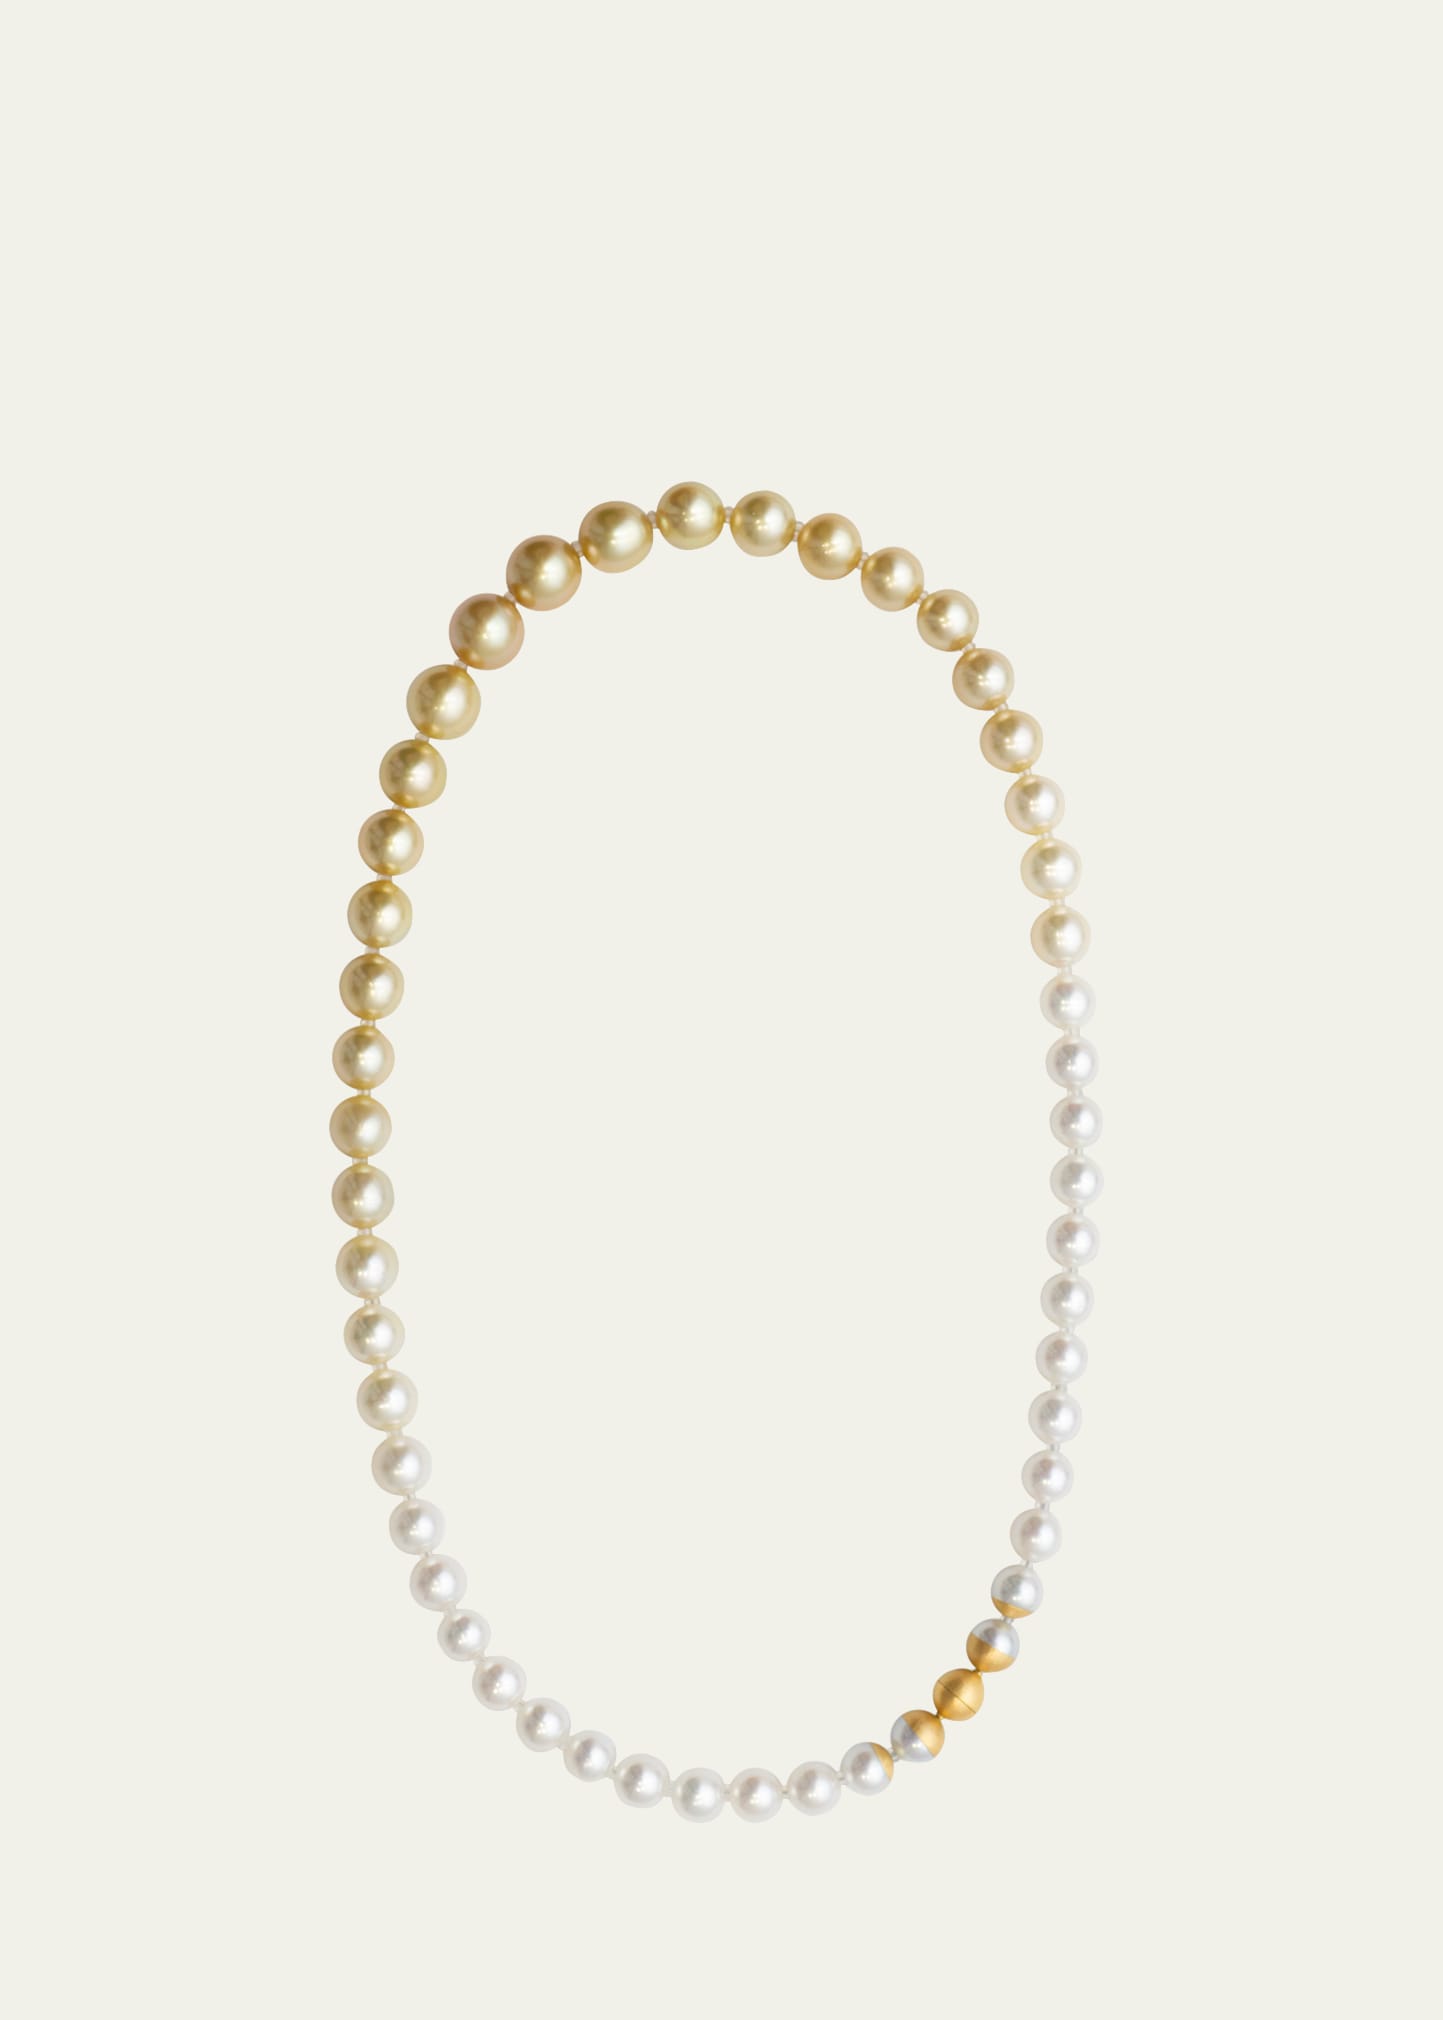 18K Yellow Gold Sectional Pearl Necklace with Golden Pearls, 18"L